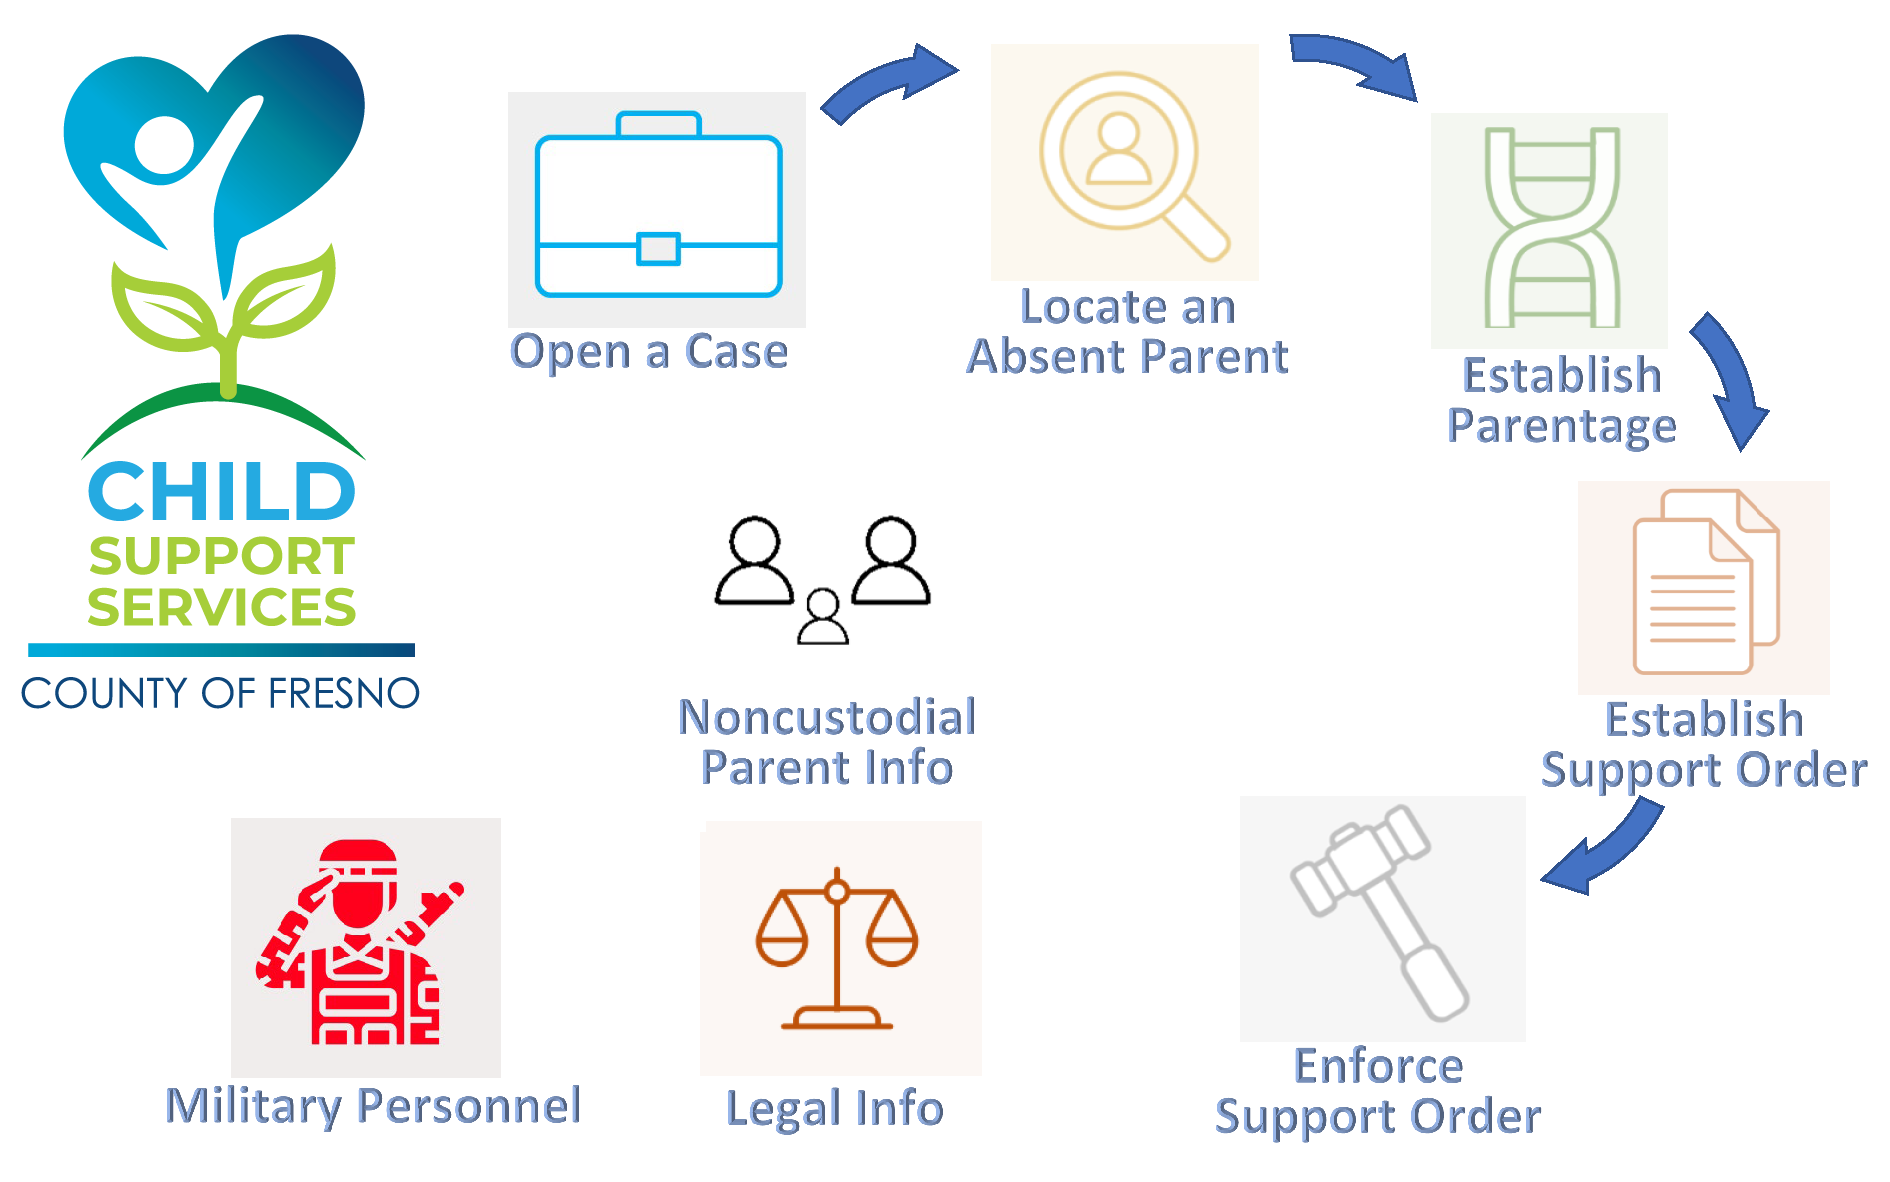 Child Support Services graphic of the workflow of opening a case, locate absent parent, establish parentage, establish support order, enforce support order, with graphics for miltary personnel, noncustodial parent info, and legal info